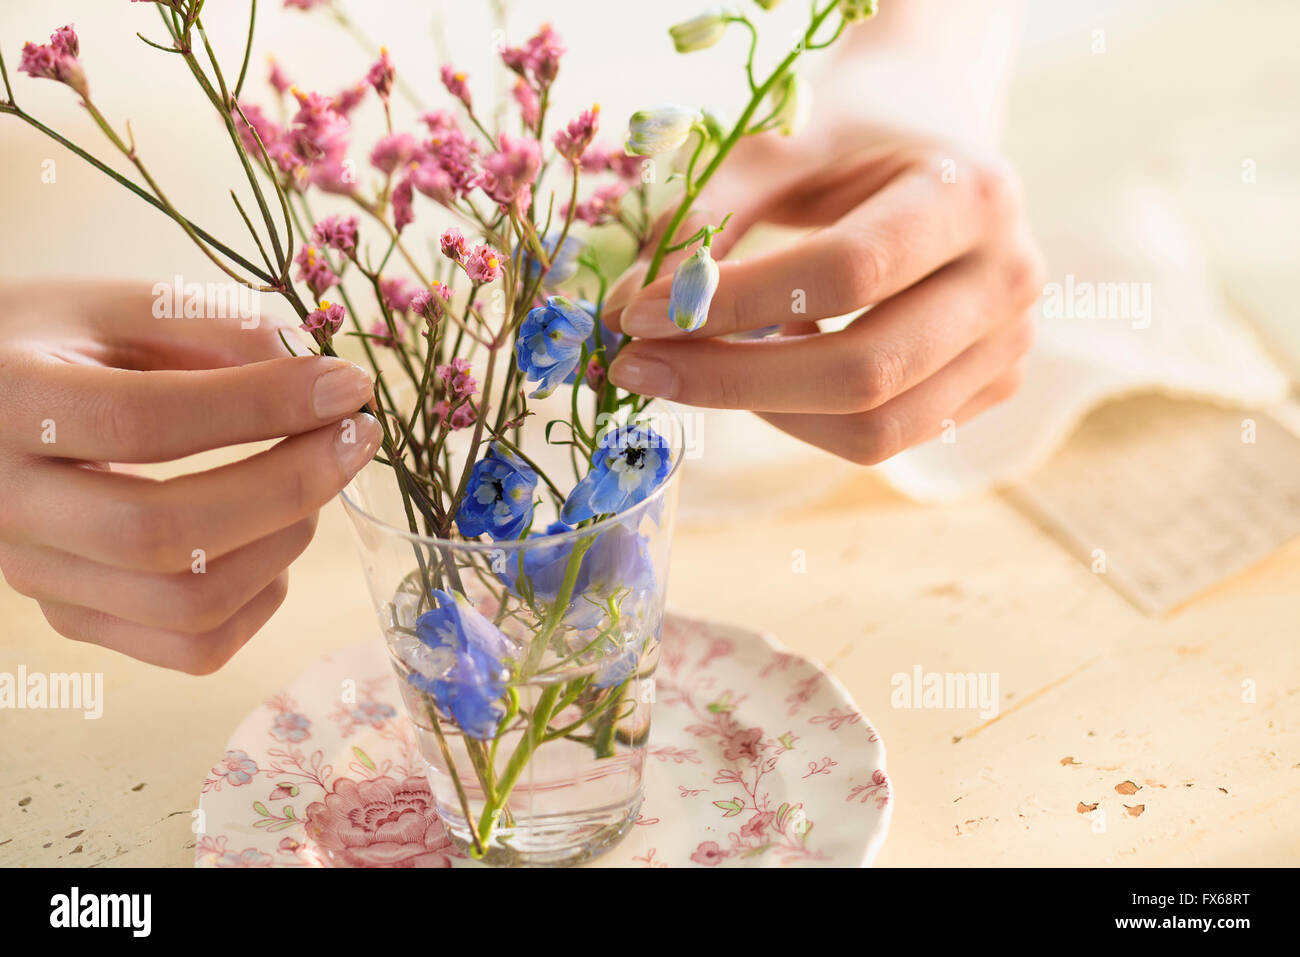 Hispanic woman arranging flowers in glass cup Stock Photo